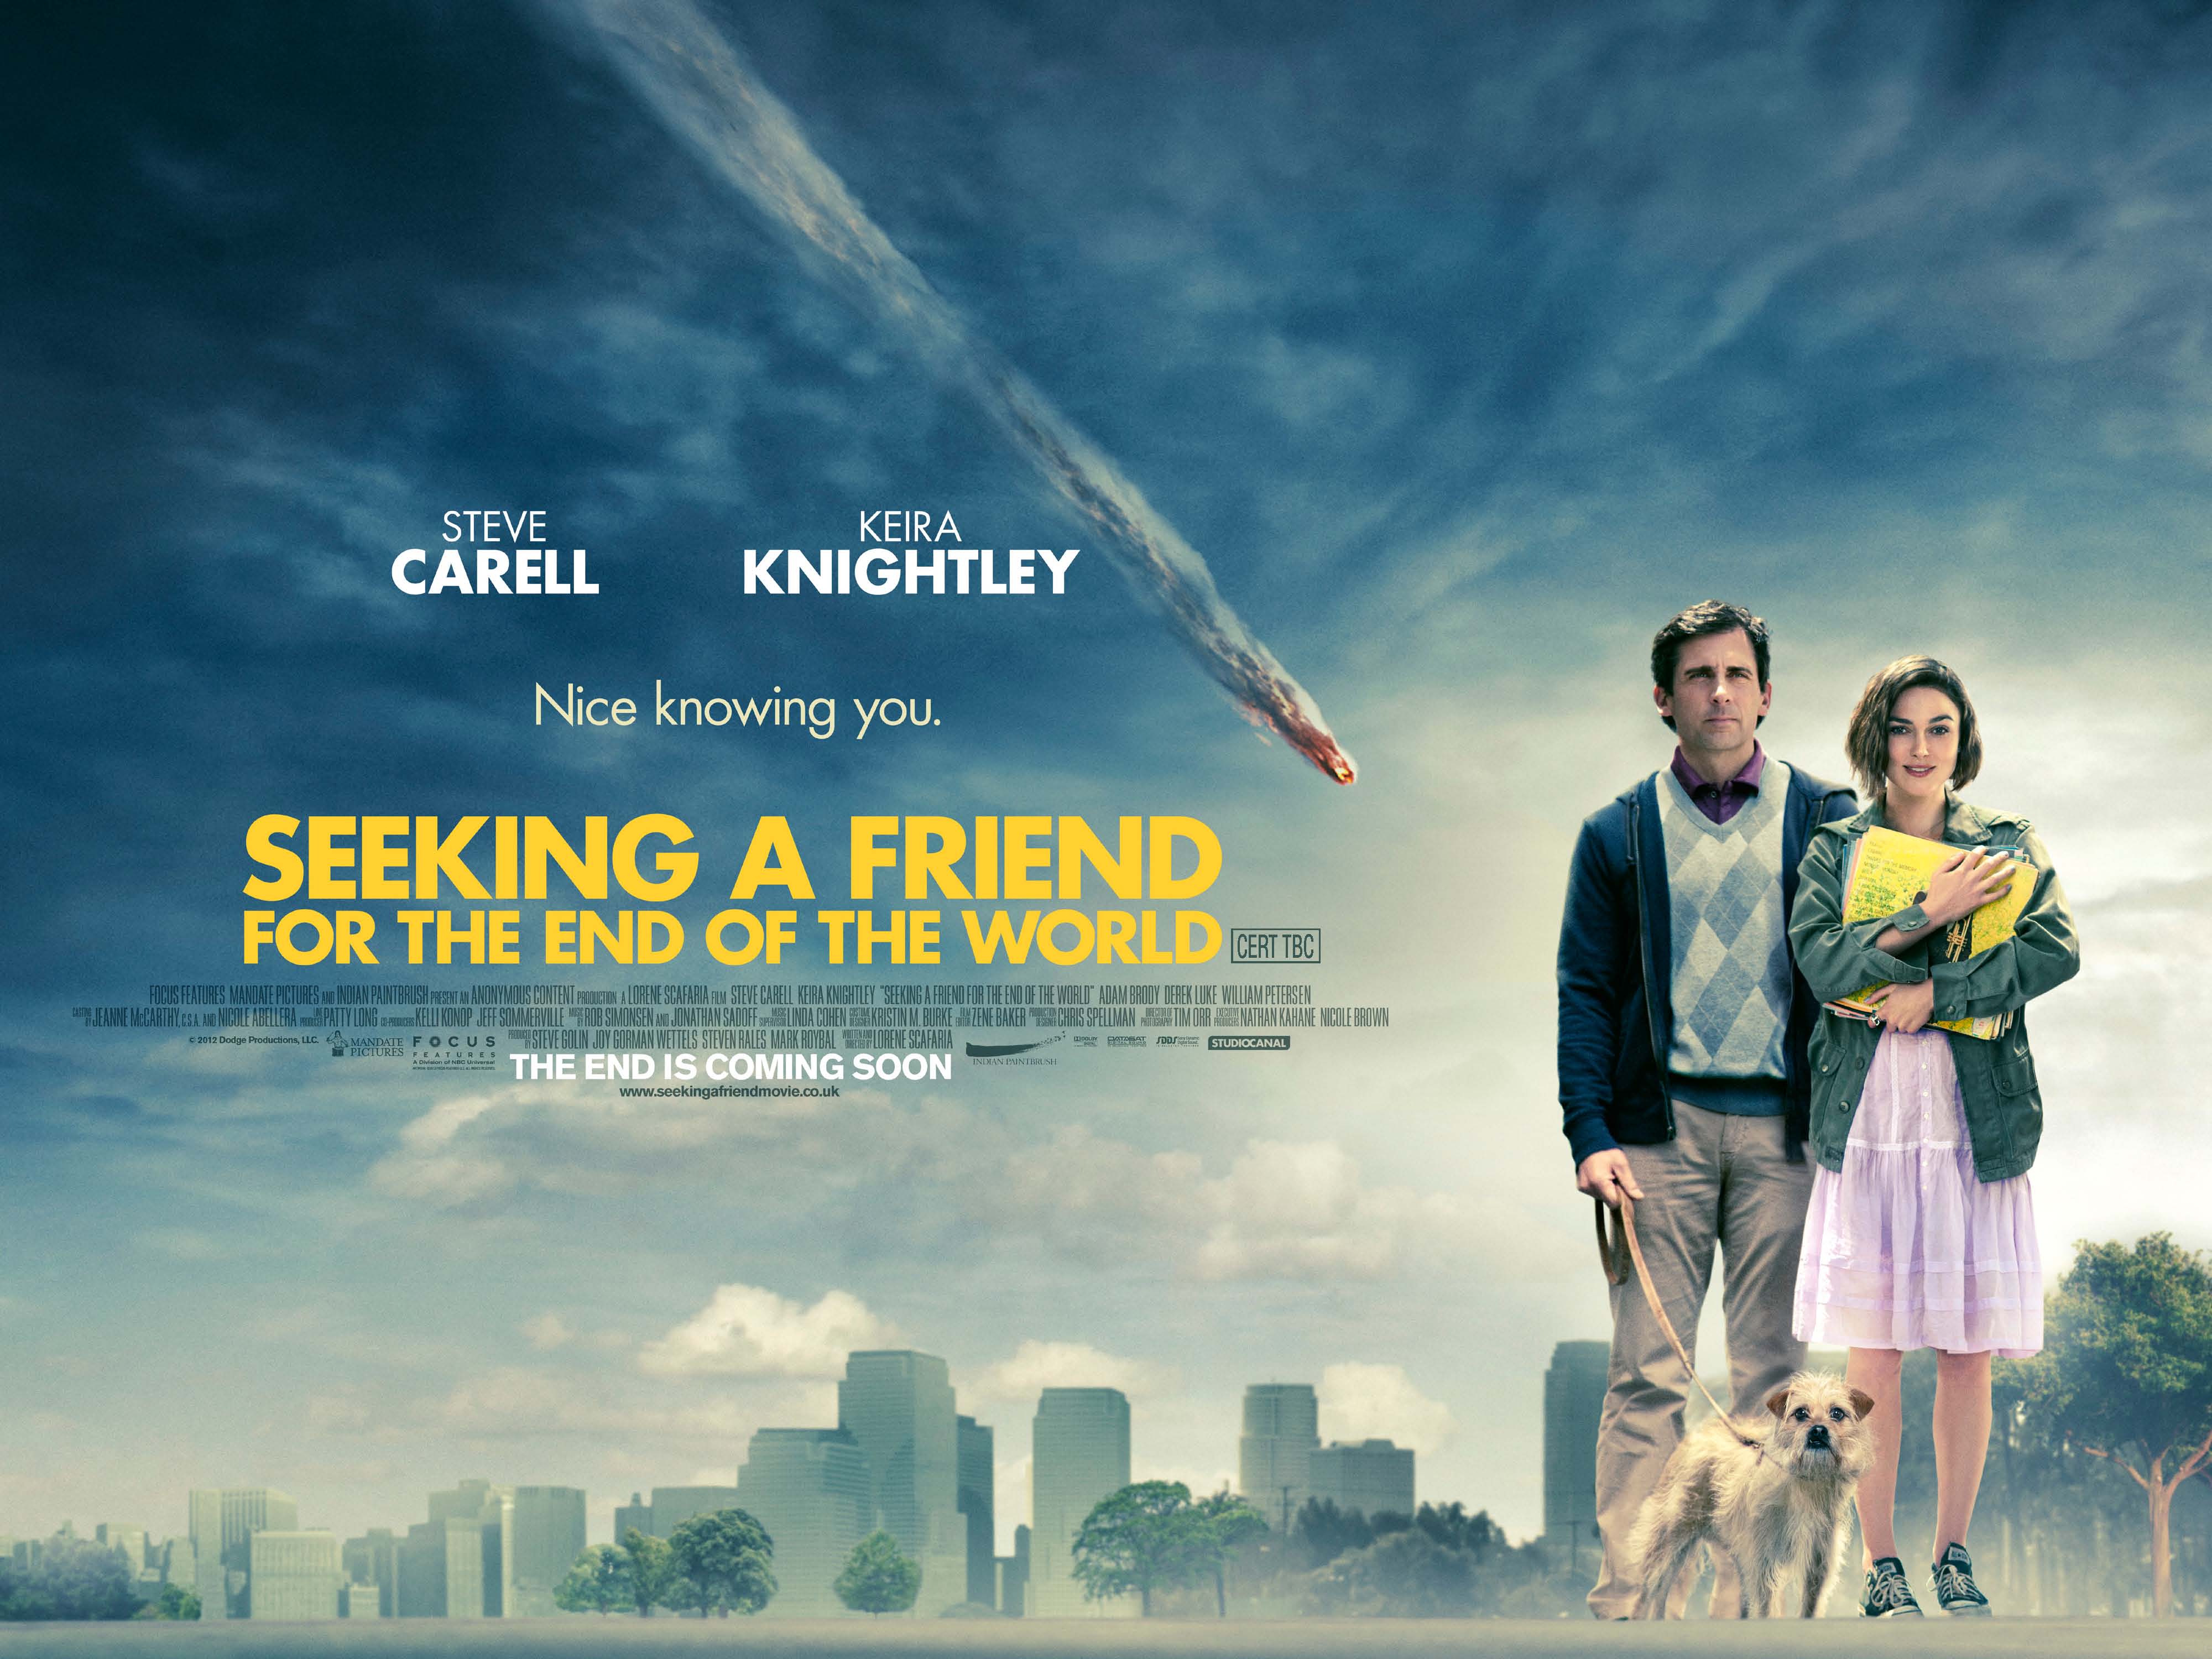 Seeking a Friend for the End of the World UK Poster